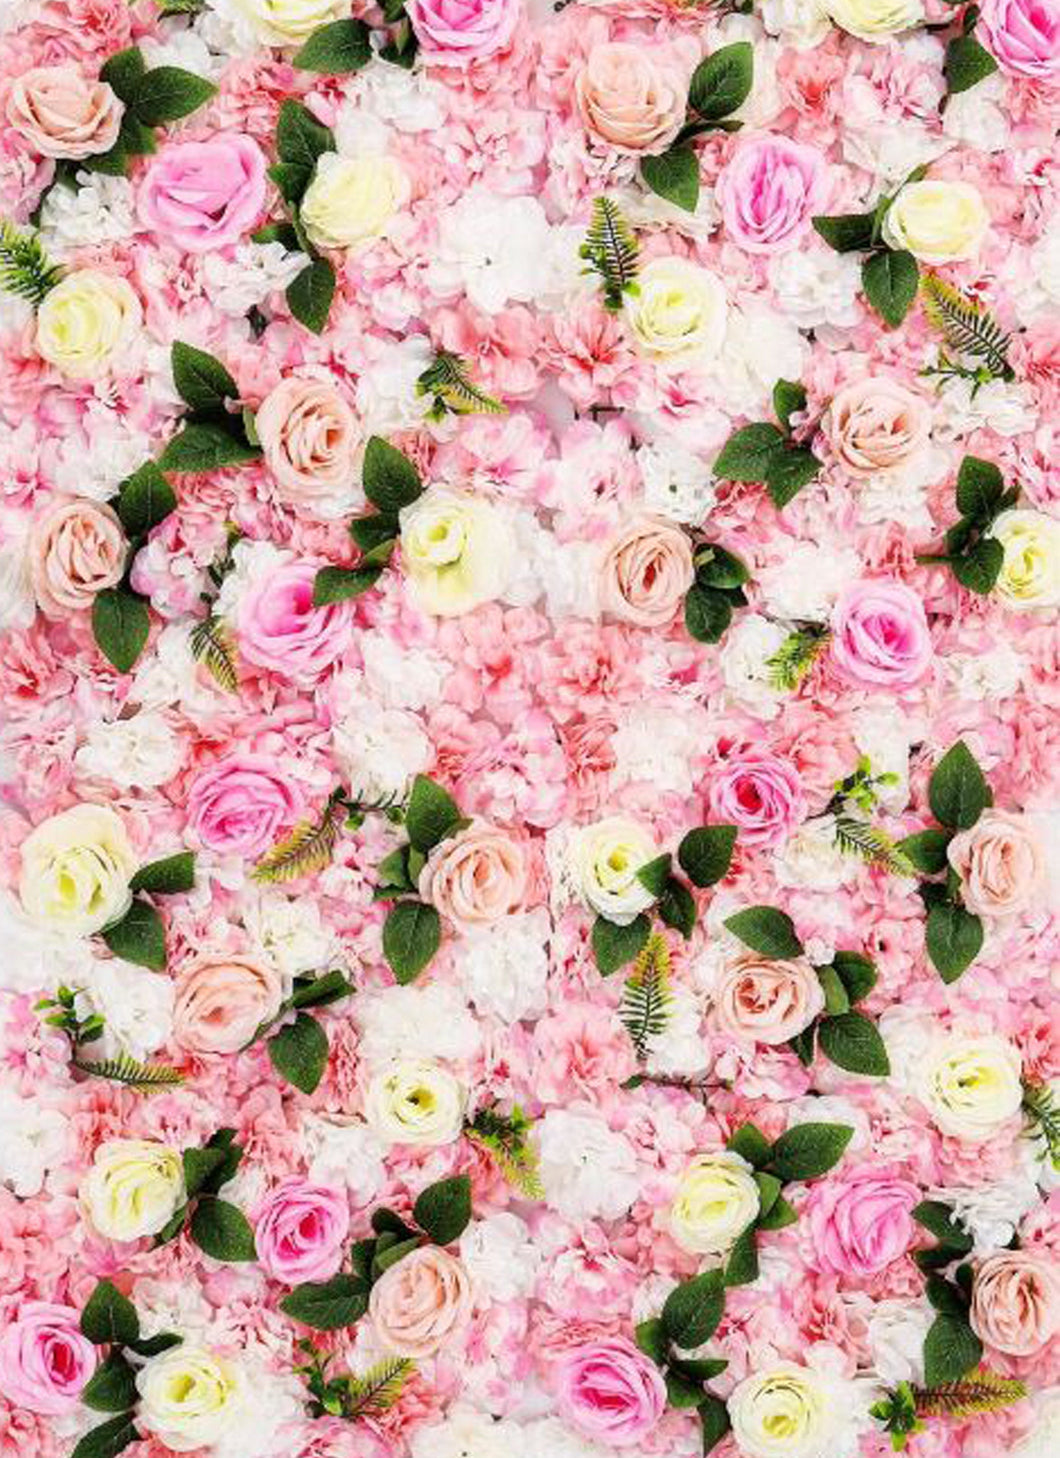 Spring Flower Wall 3-D Artificial Flower Panel Home Shop Party Holiday Wall Decor Photography Background Backdrop Setting Floral Wall